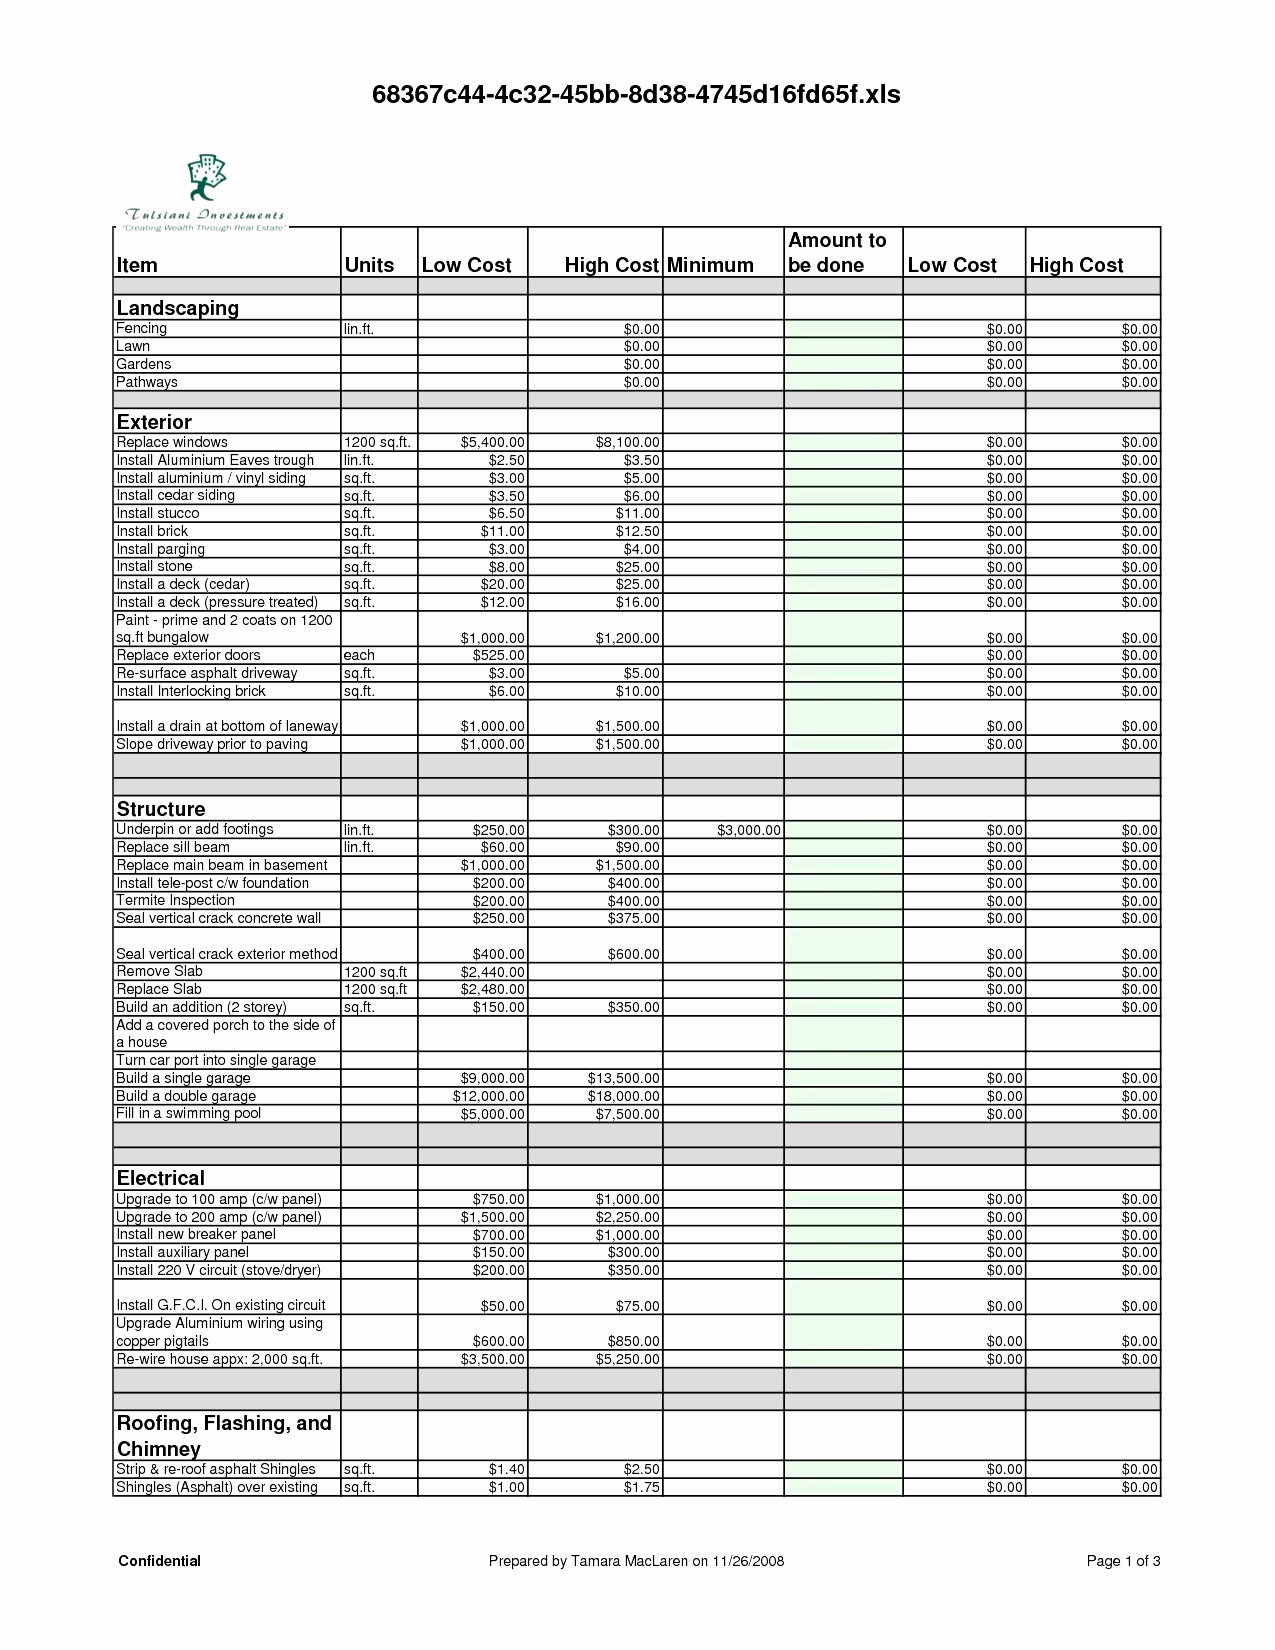 Fascinating Construction Cost Sheet Template